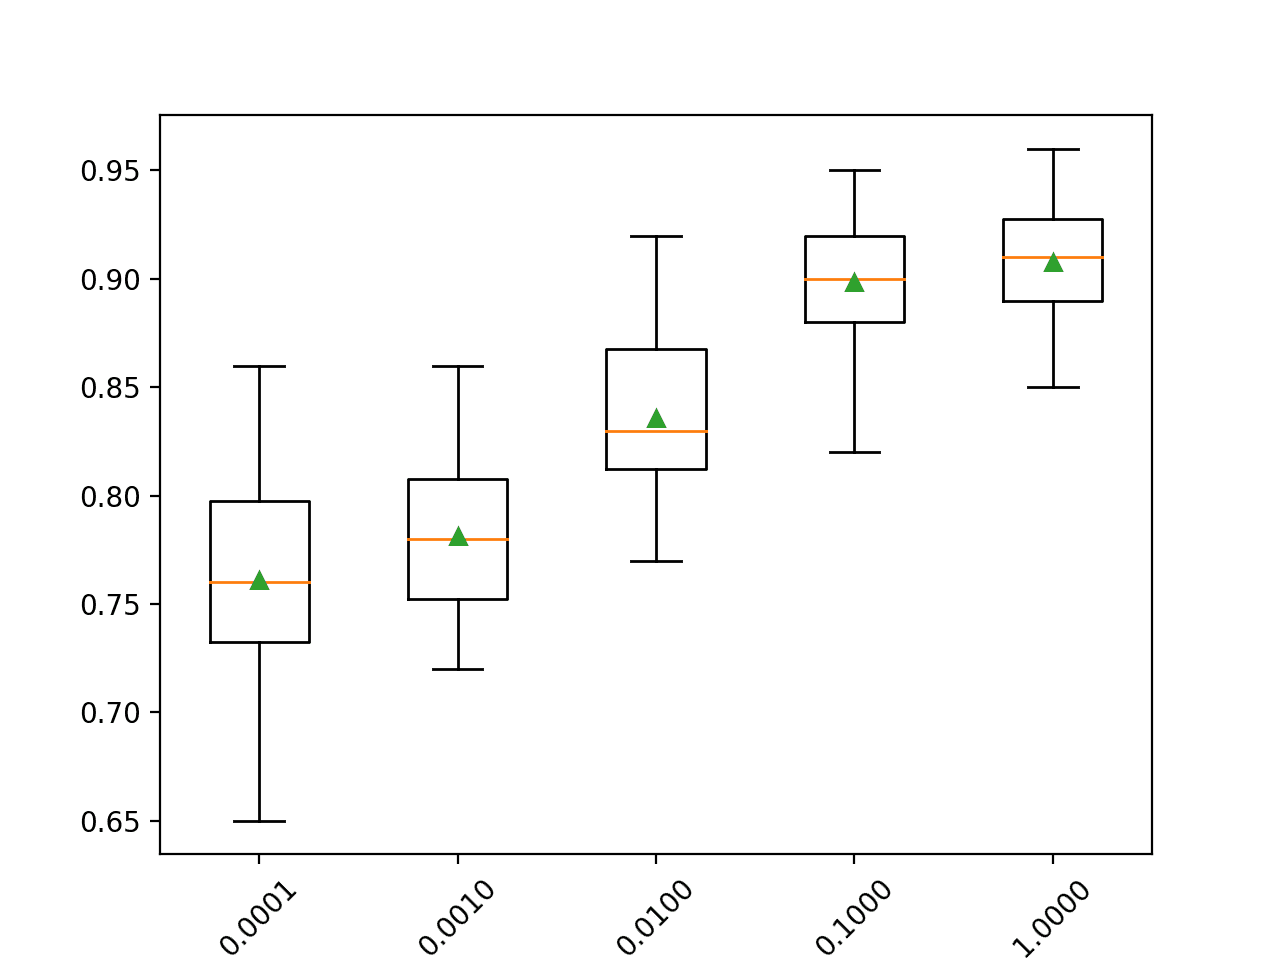 Box Plot of Gradient Boosting Ensemble Learning Rate vs. Classification Accuracy